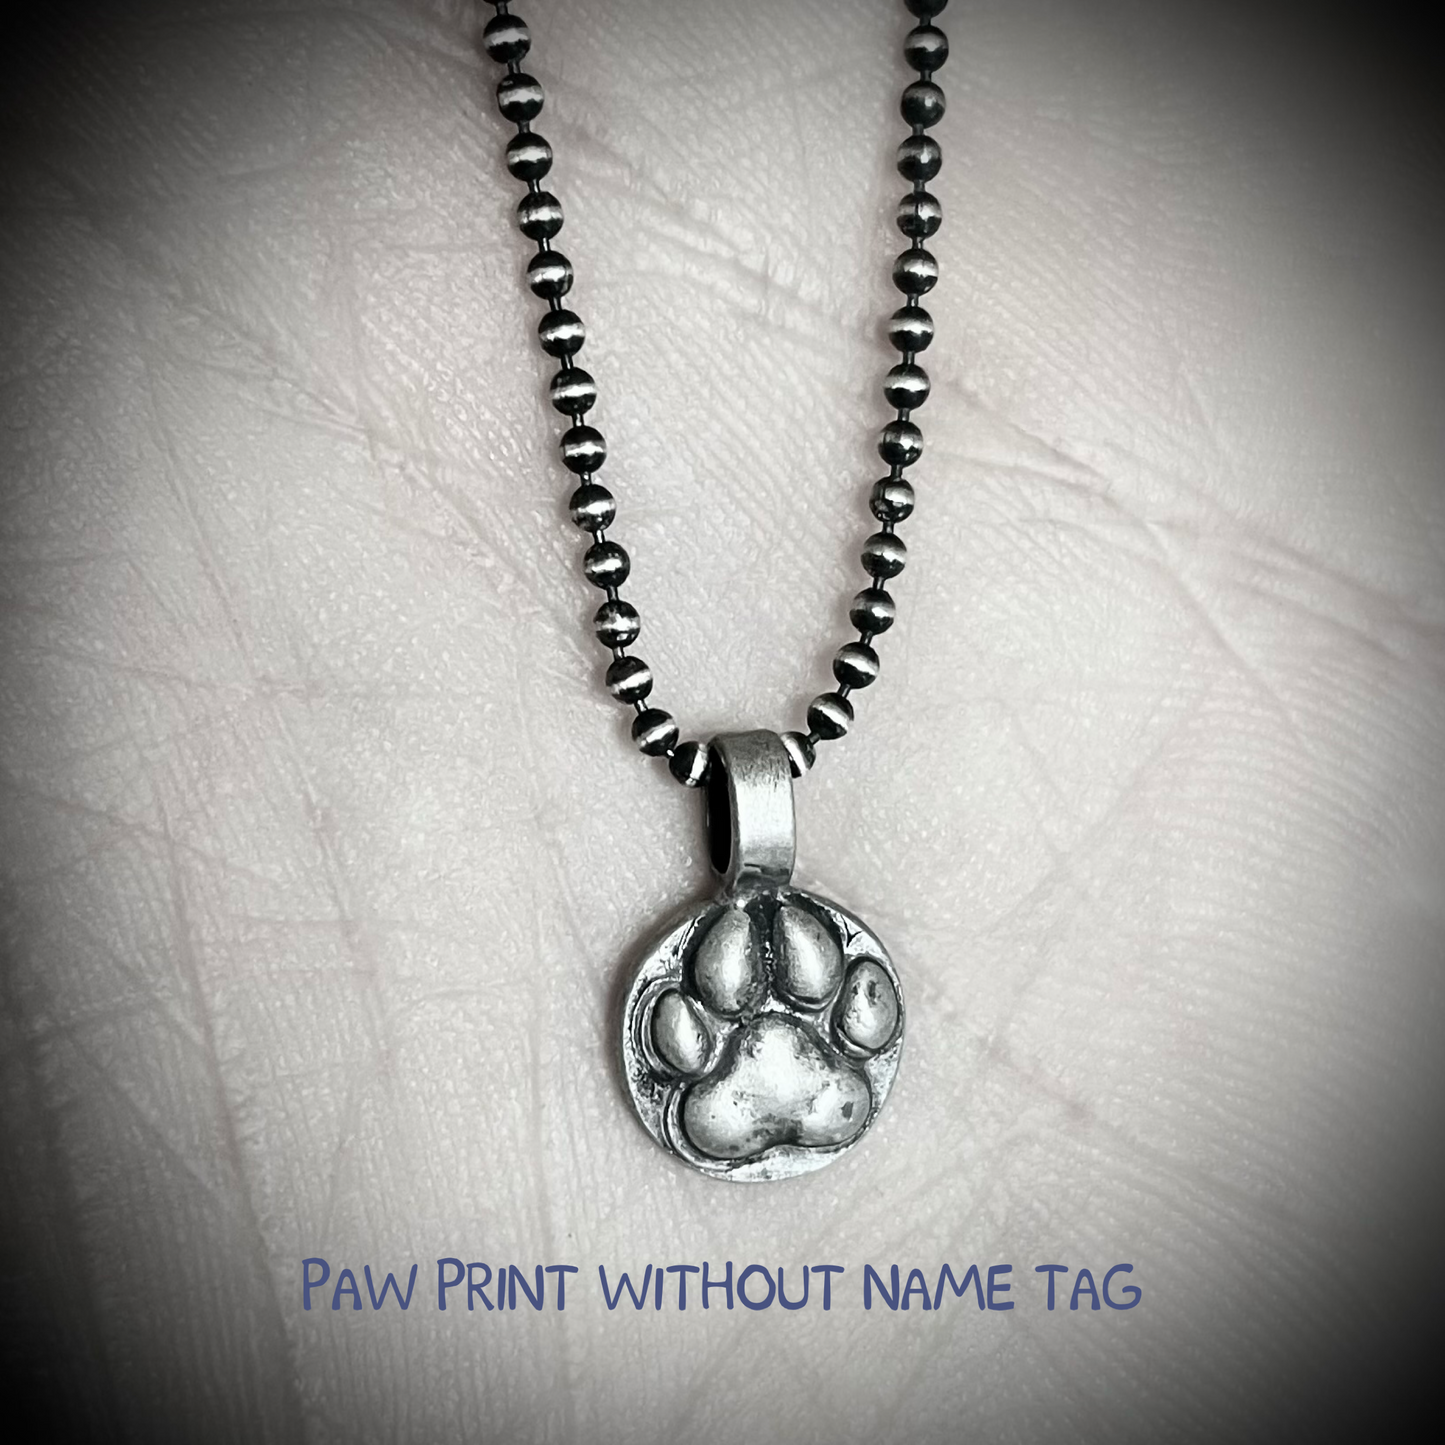 Memorial Paw Print Necklace